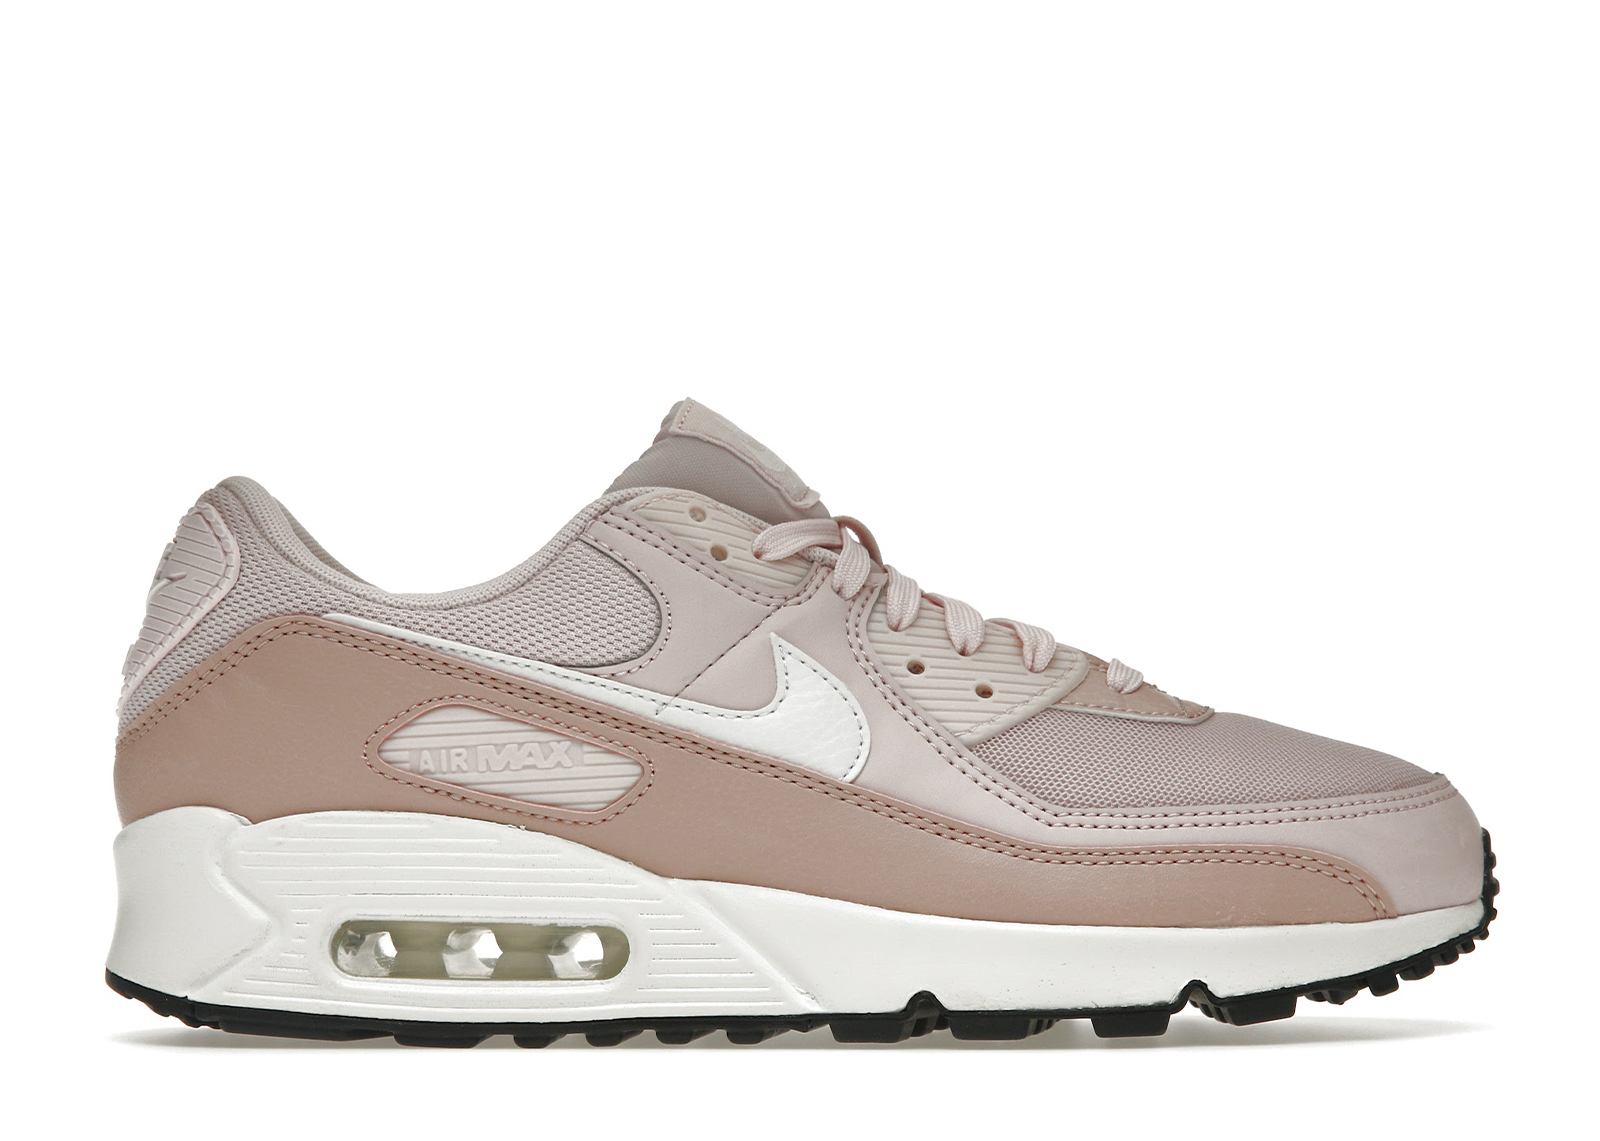 Nike Air Max 90 Barely Rose Pink Oxford Black (Women's 